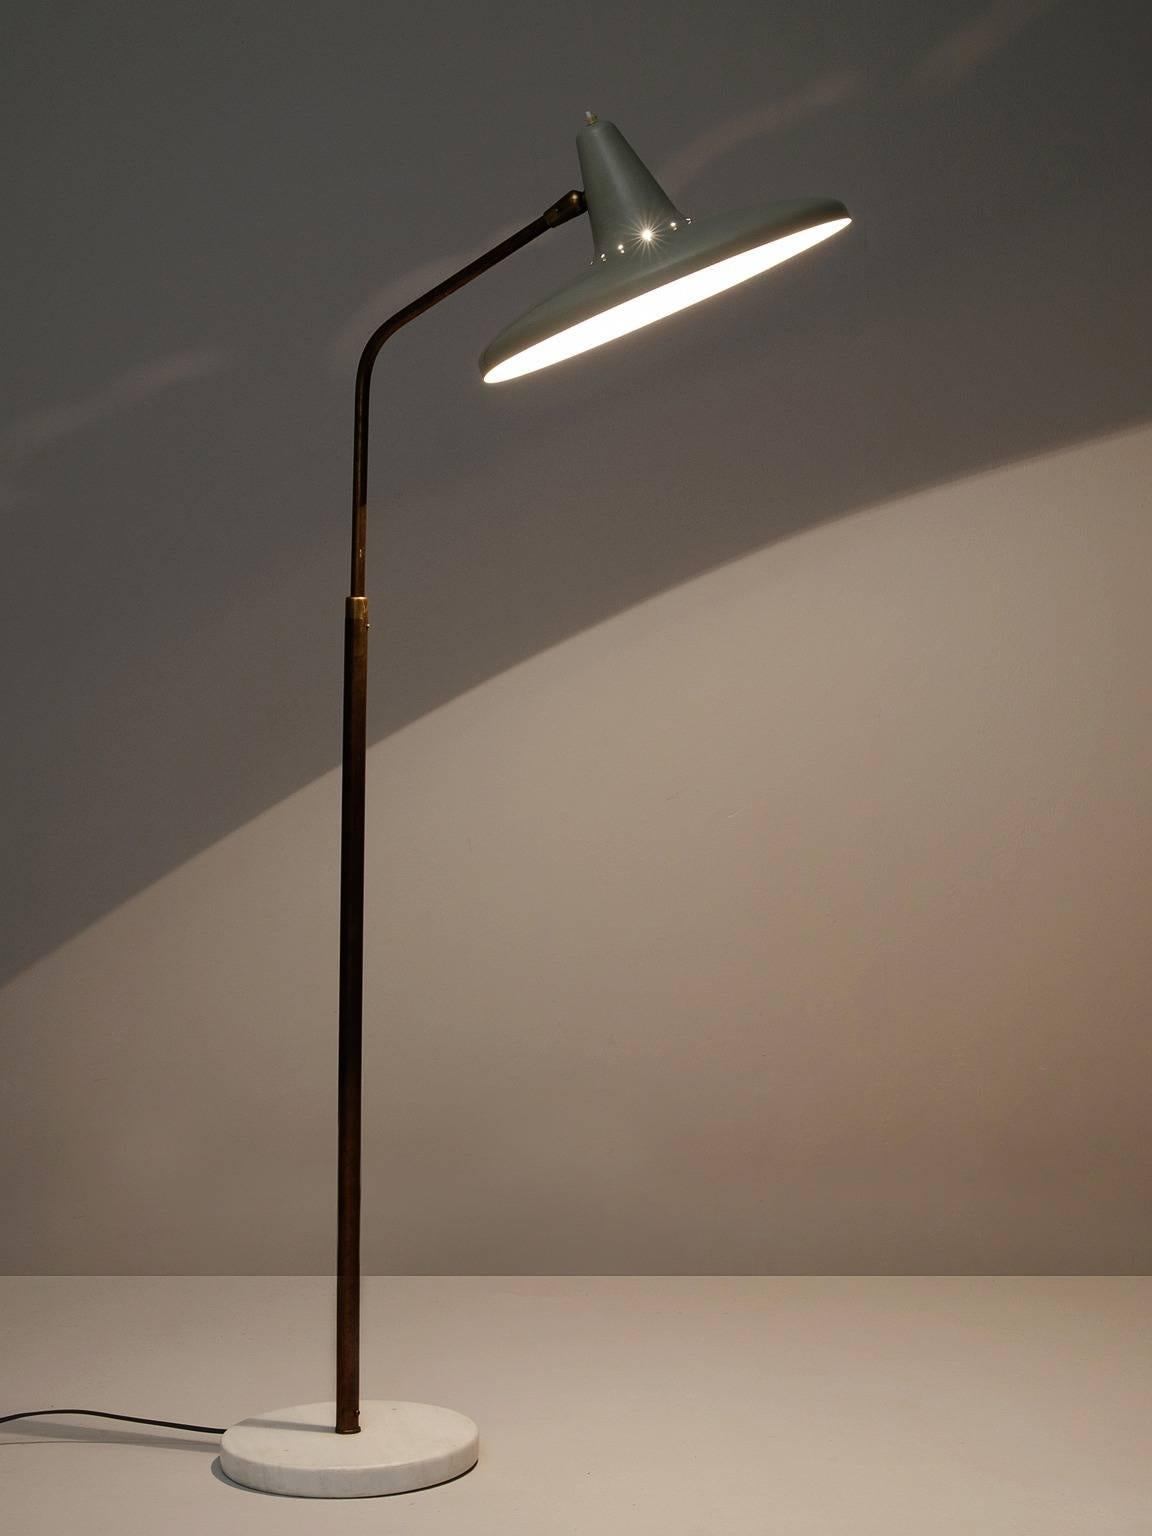 Floor lamp, in brass, marble and metal, by Giuseppe Ostuni for O-Luce, Italy 1955.

Adjustable floor lamp with telescopic mechanism. This marble based floor lamp is another great example of the quality and ingenuity of the Italian lighting